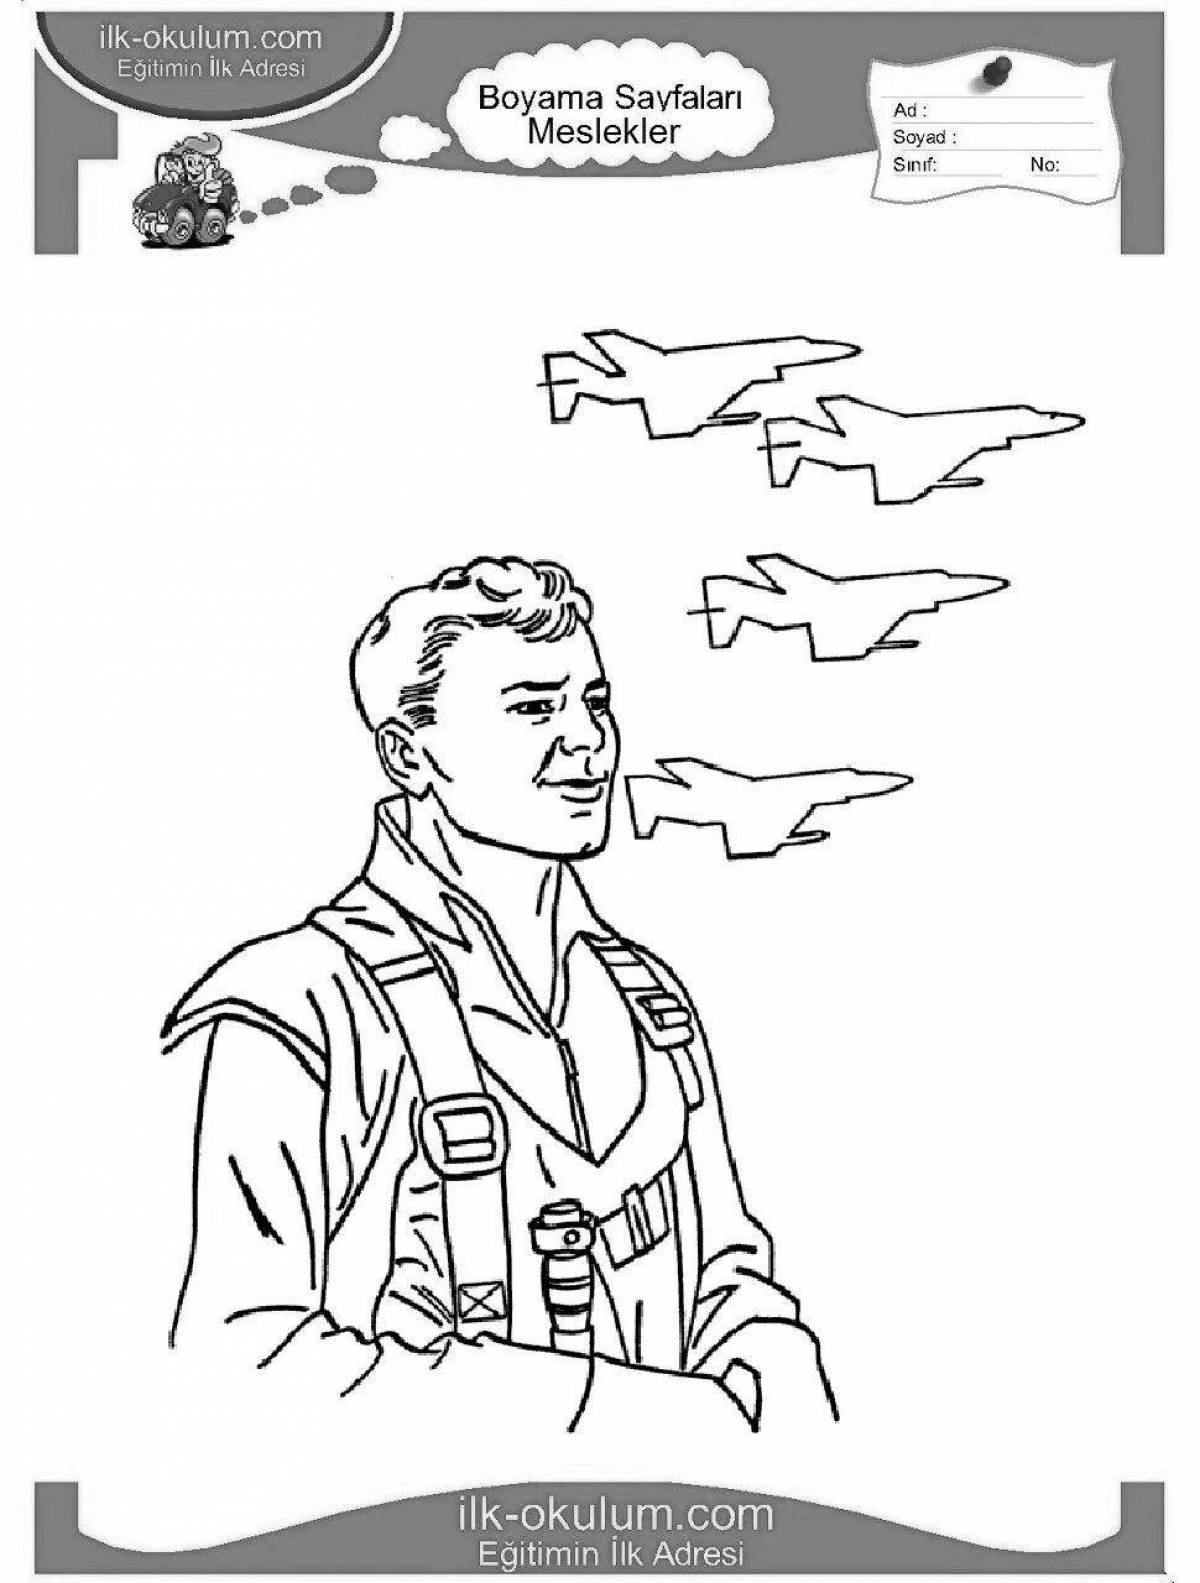 Adorable military pilot coloring book for kids